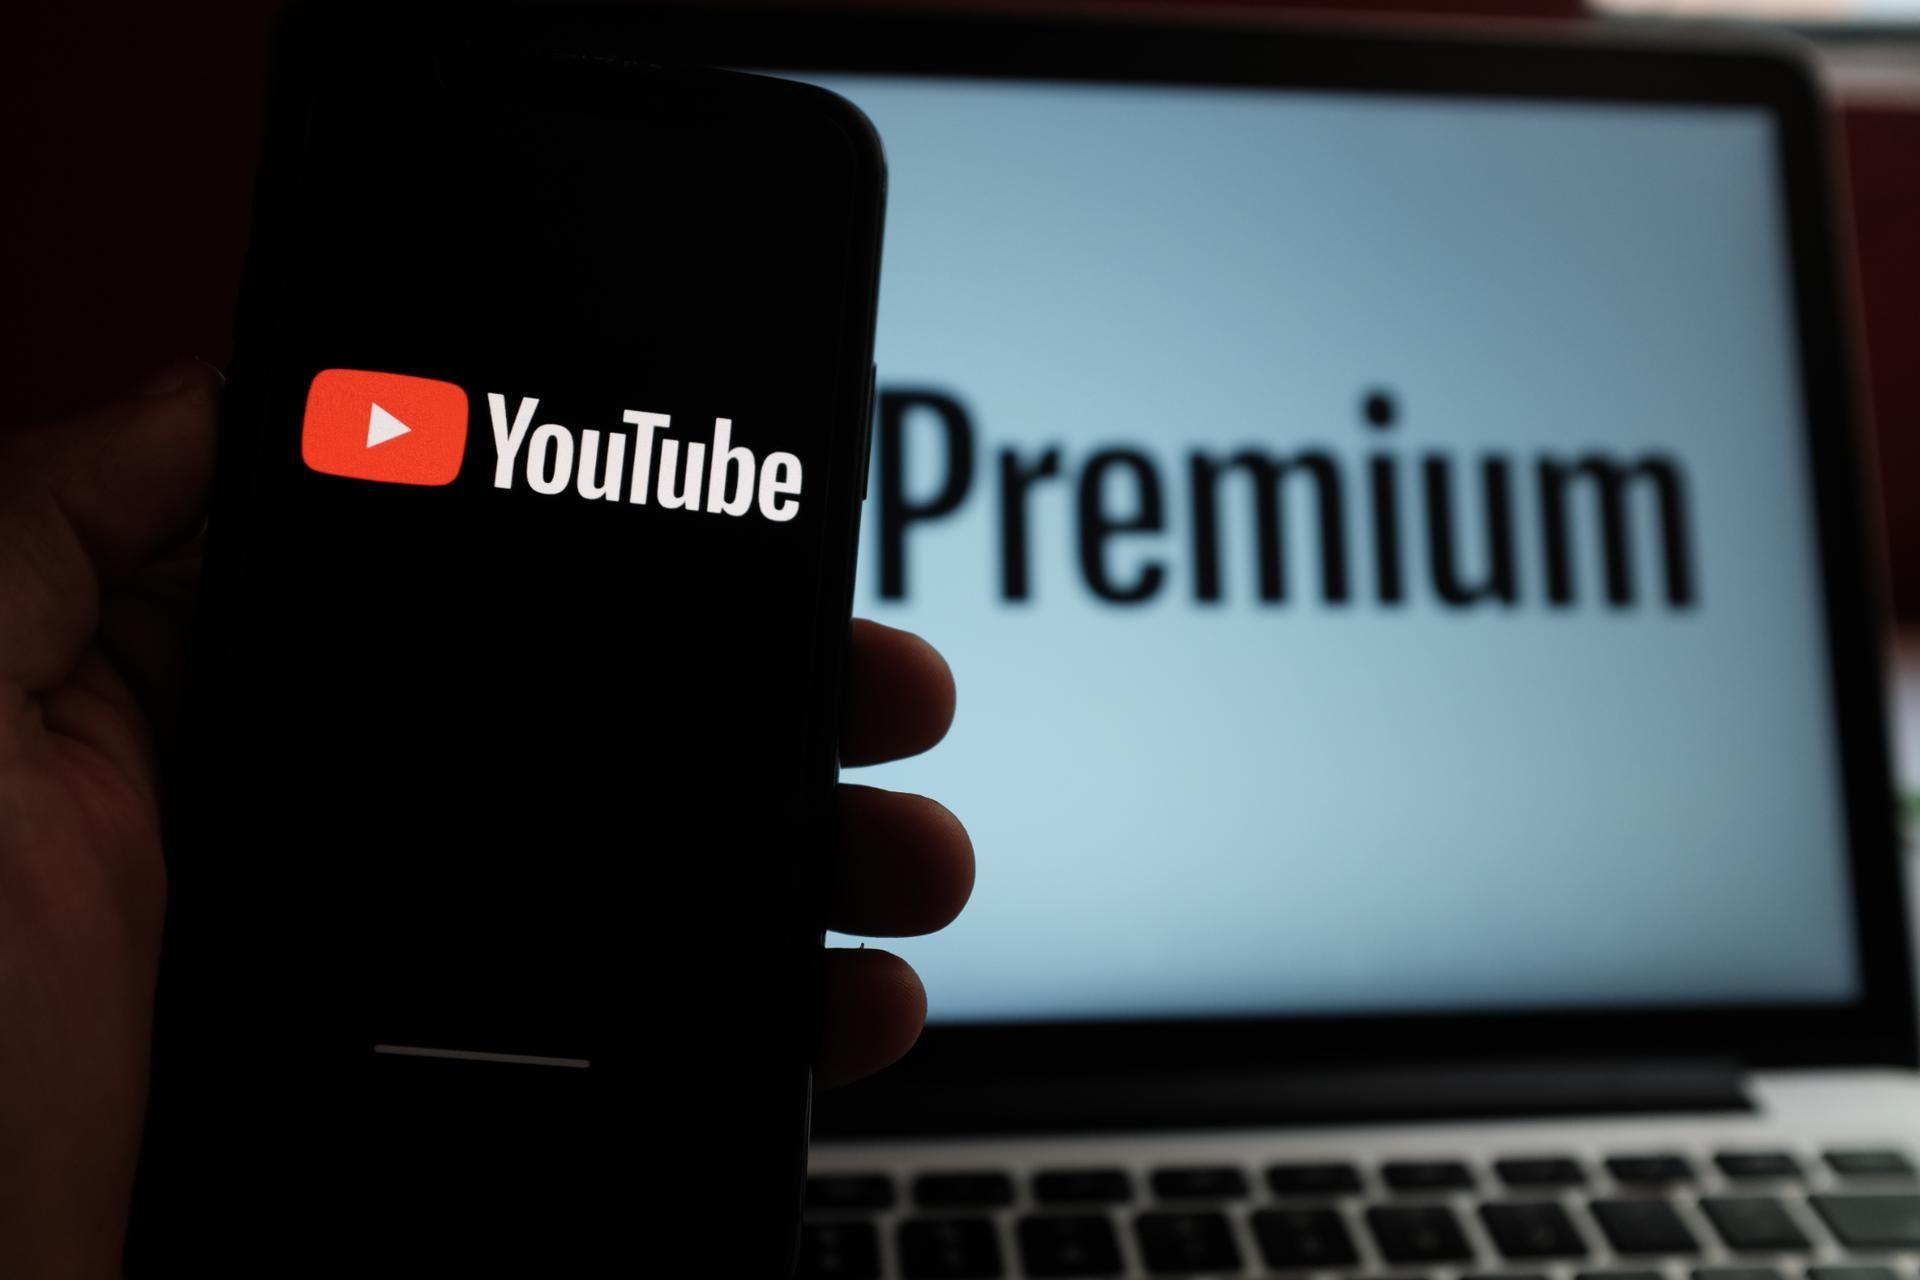 Premium subscribers can now play online games on YouTube